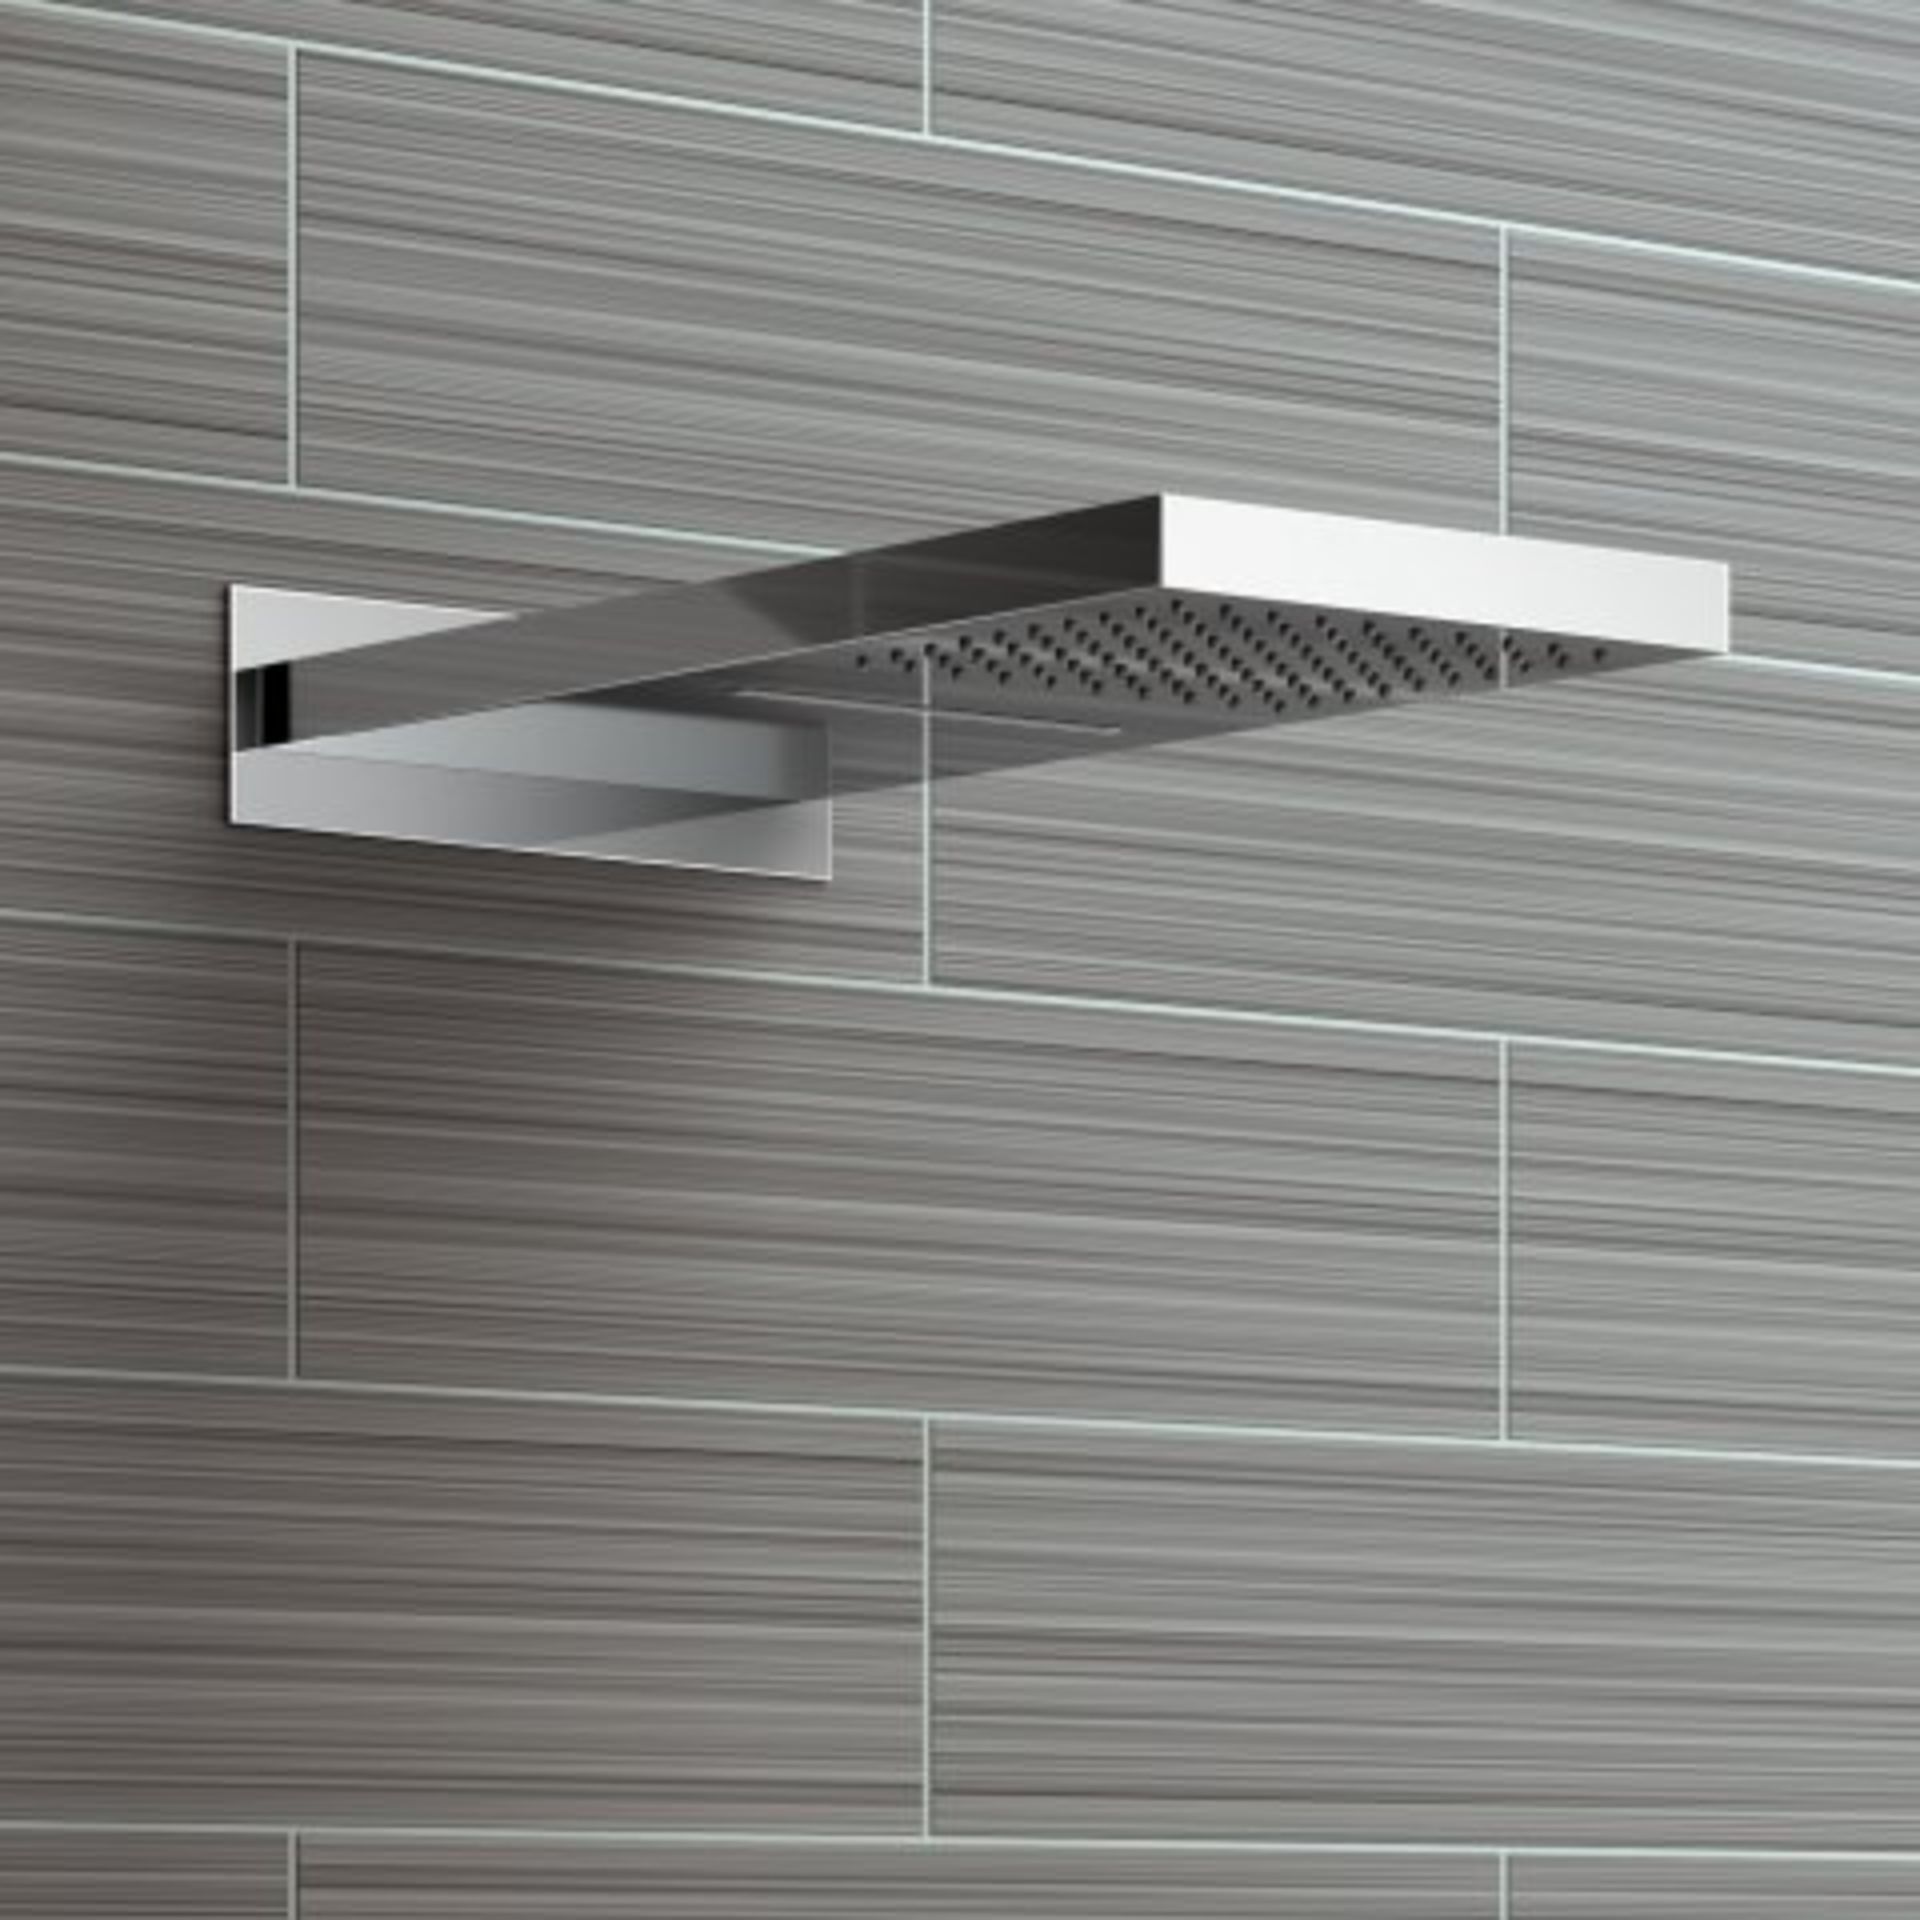 (H241) Stainless Steel 200x550mm Waterfall Shower Head RRP £449.99 "What An Experience": Enjoy - Image 4 of 4